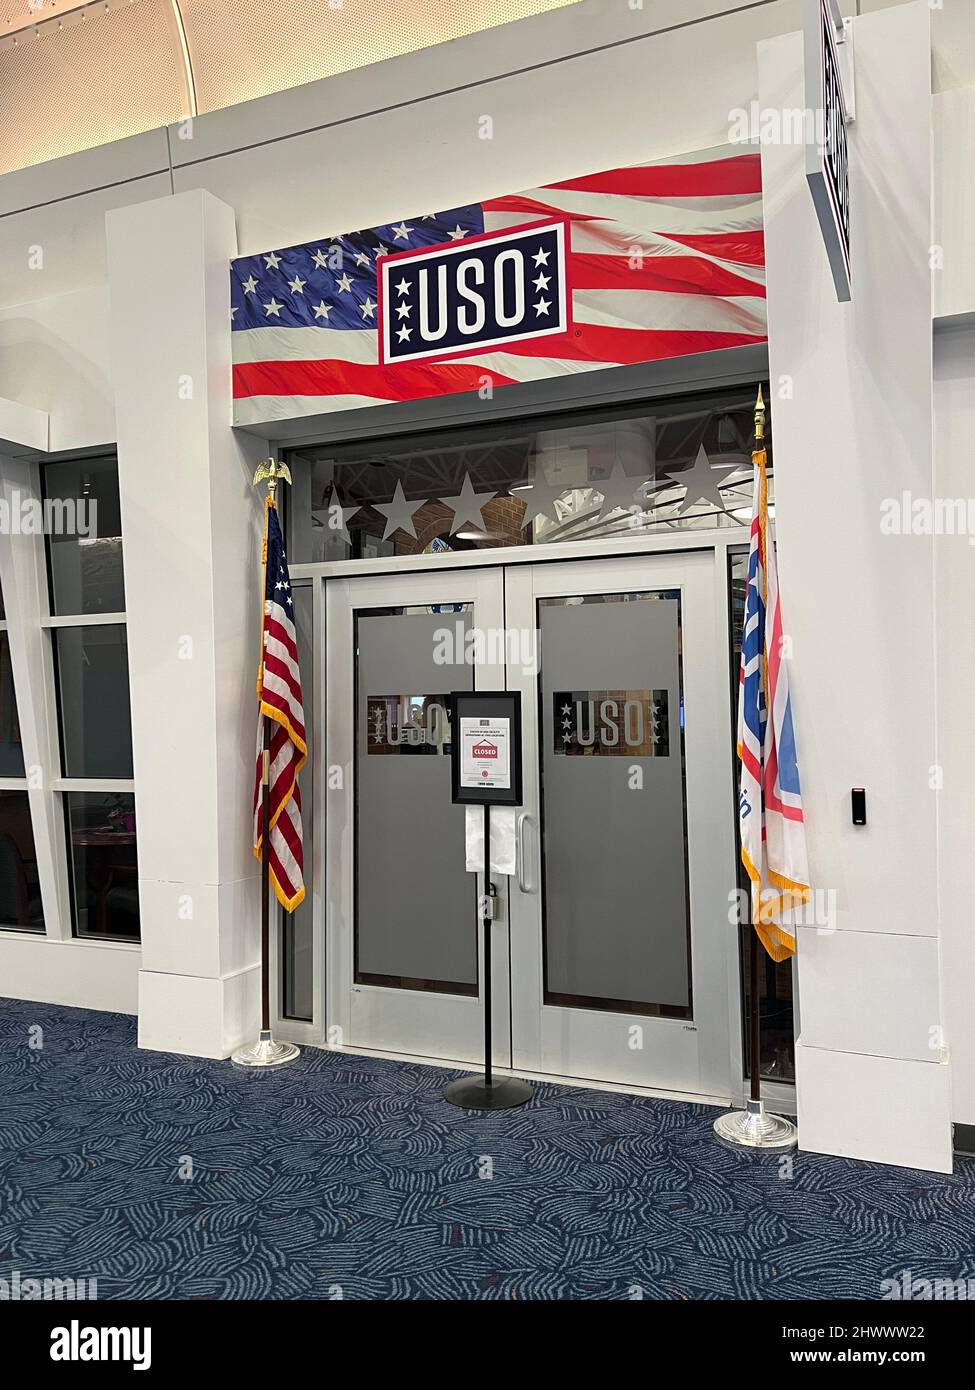 USO Lounge at Milwaukee's General Mitchell International Airport. USO airport lounges are made to provide comfort to the military community. Stock Photo